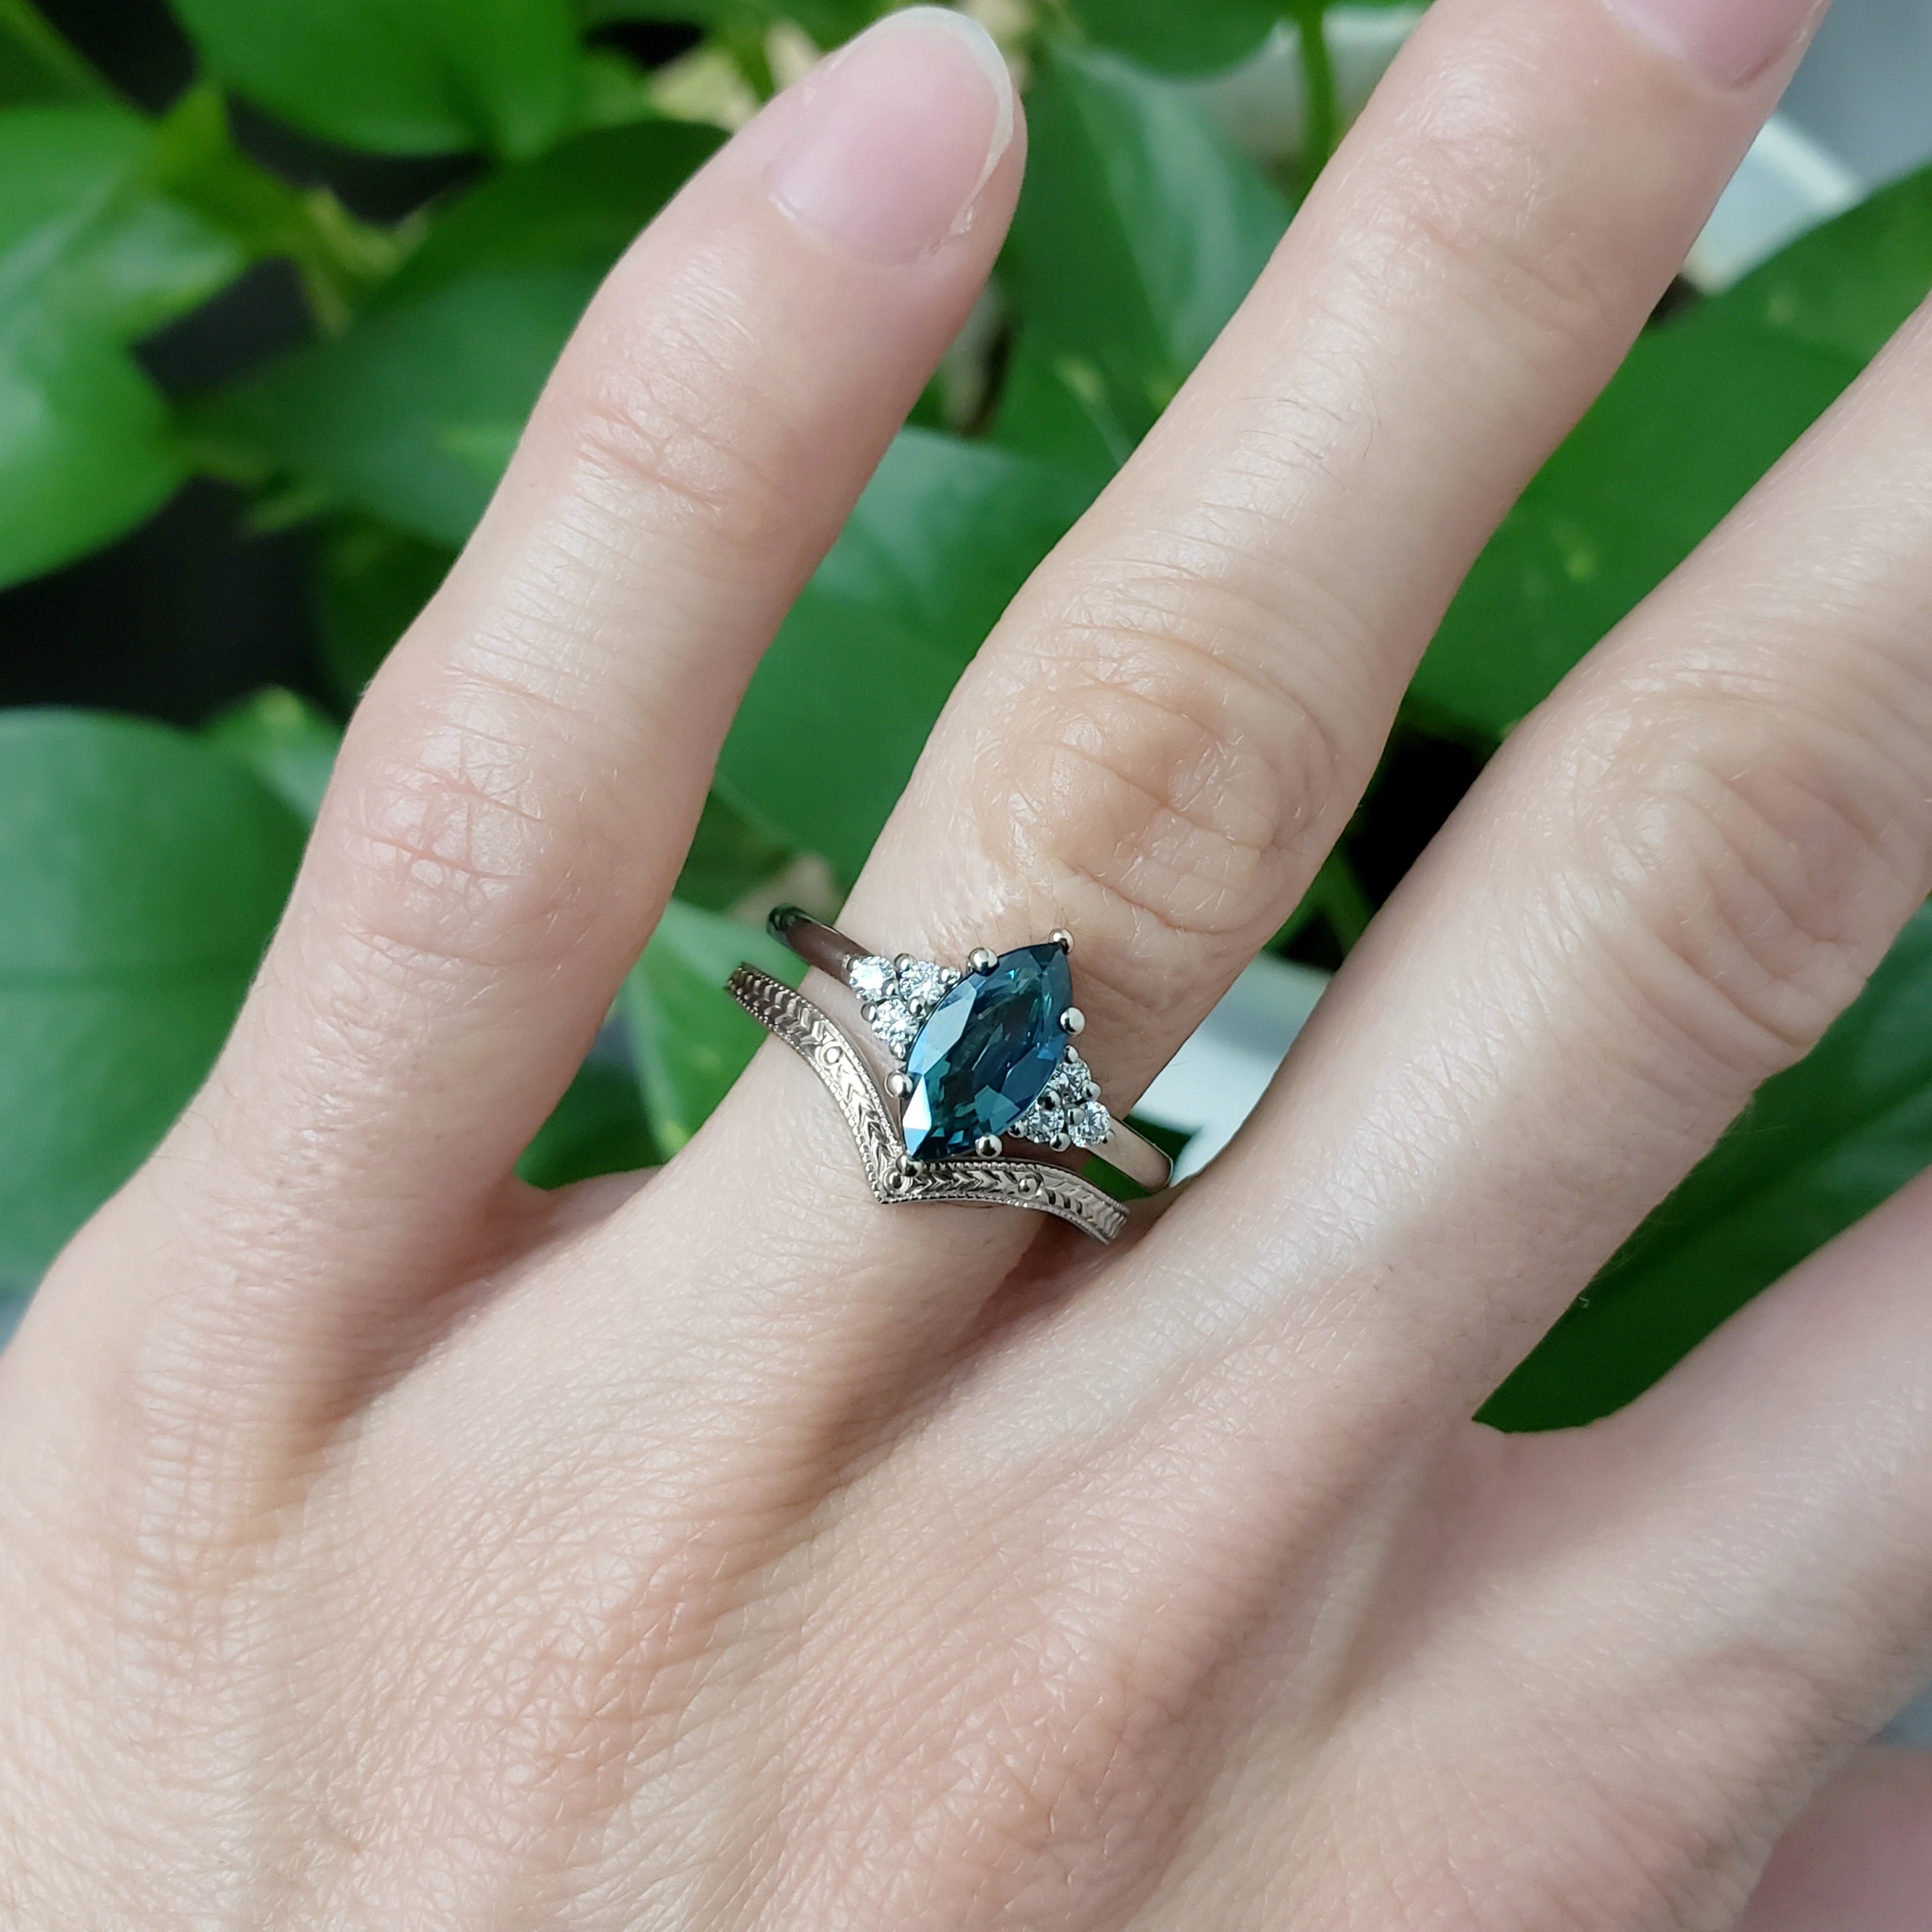 Teal Sapphire Engagement Ring | Era Design Vancouver Canada